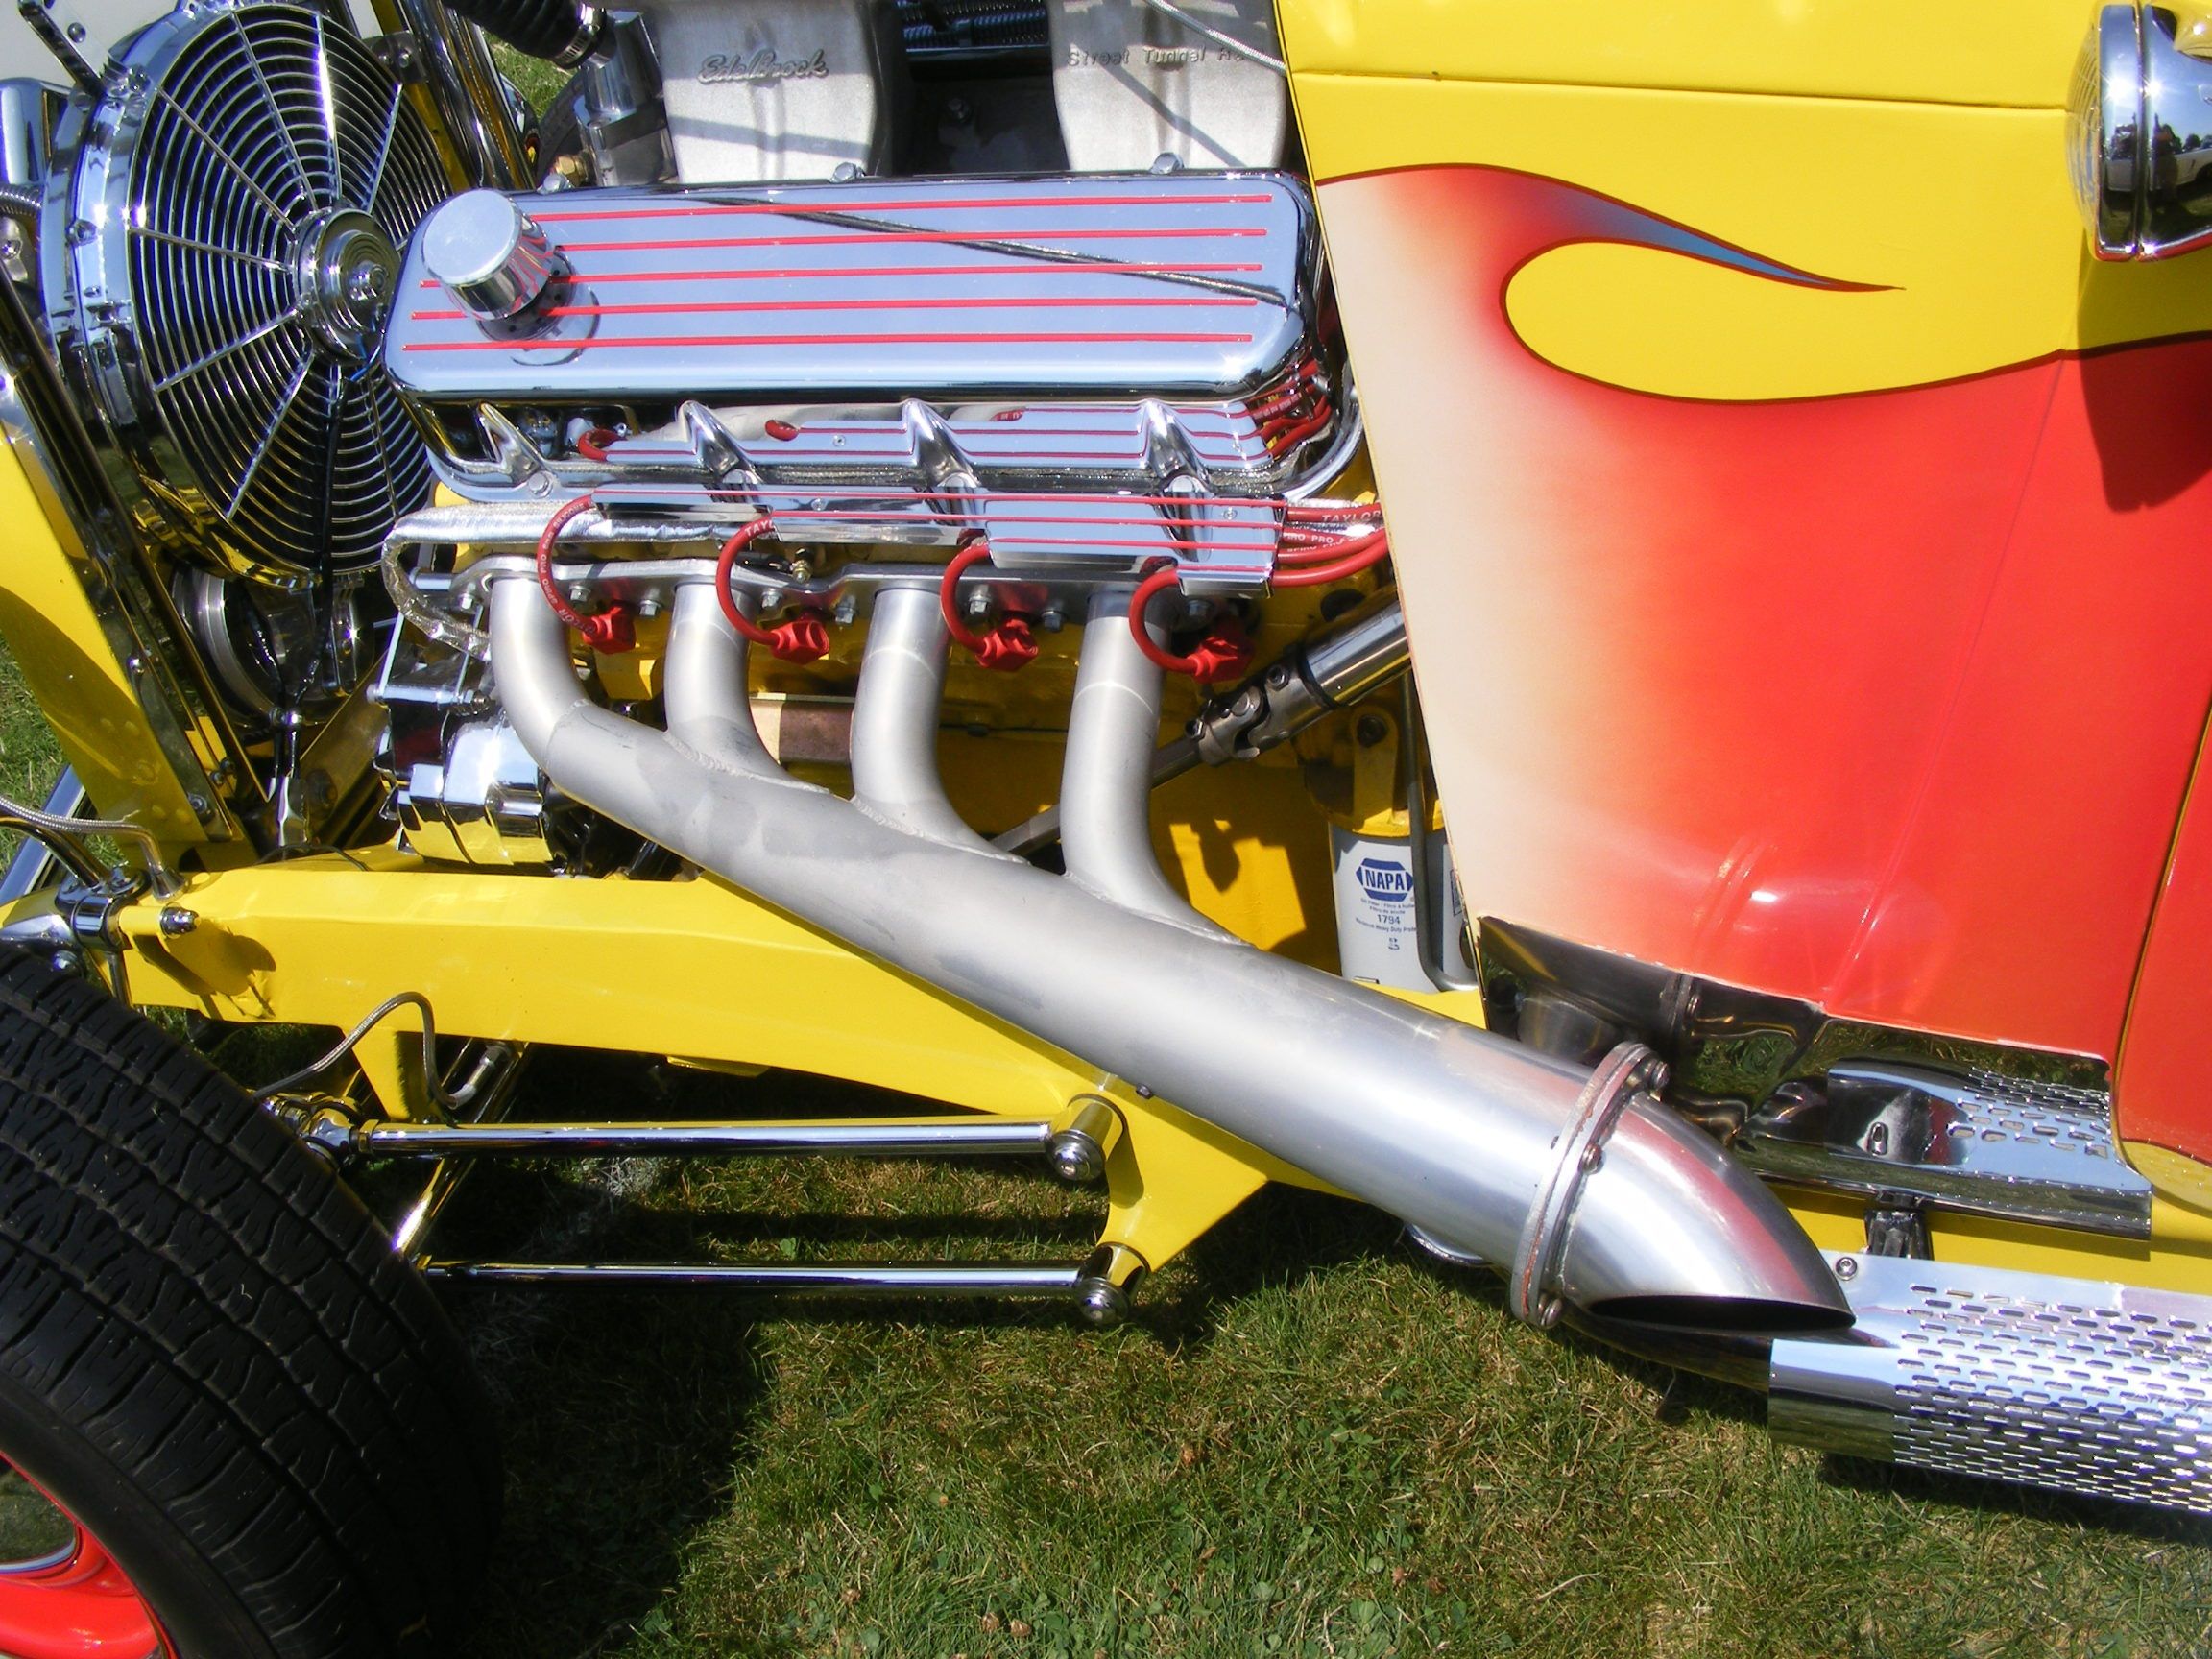 Aftermarket Exhausts: More Complicated Than You Might Think